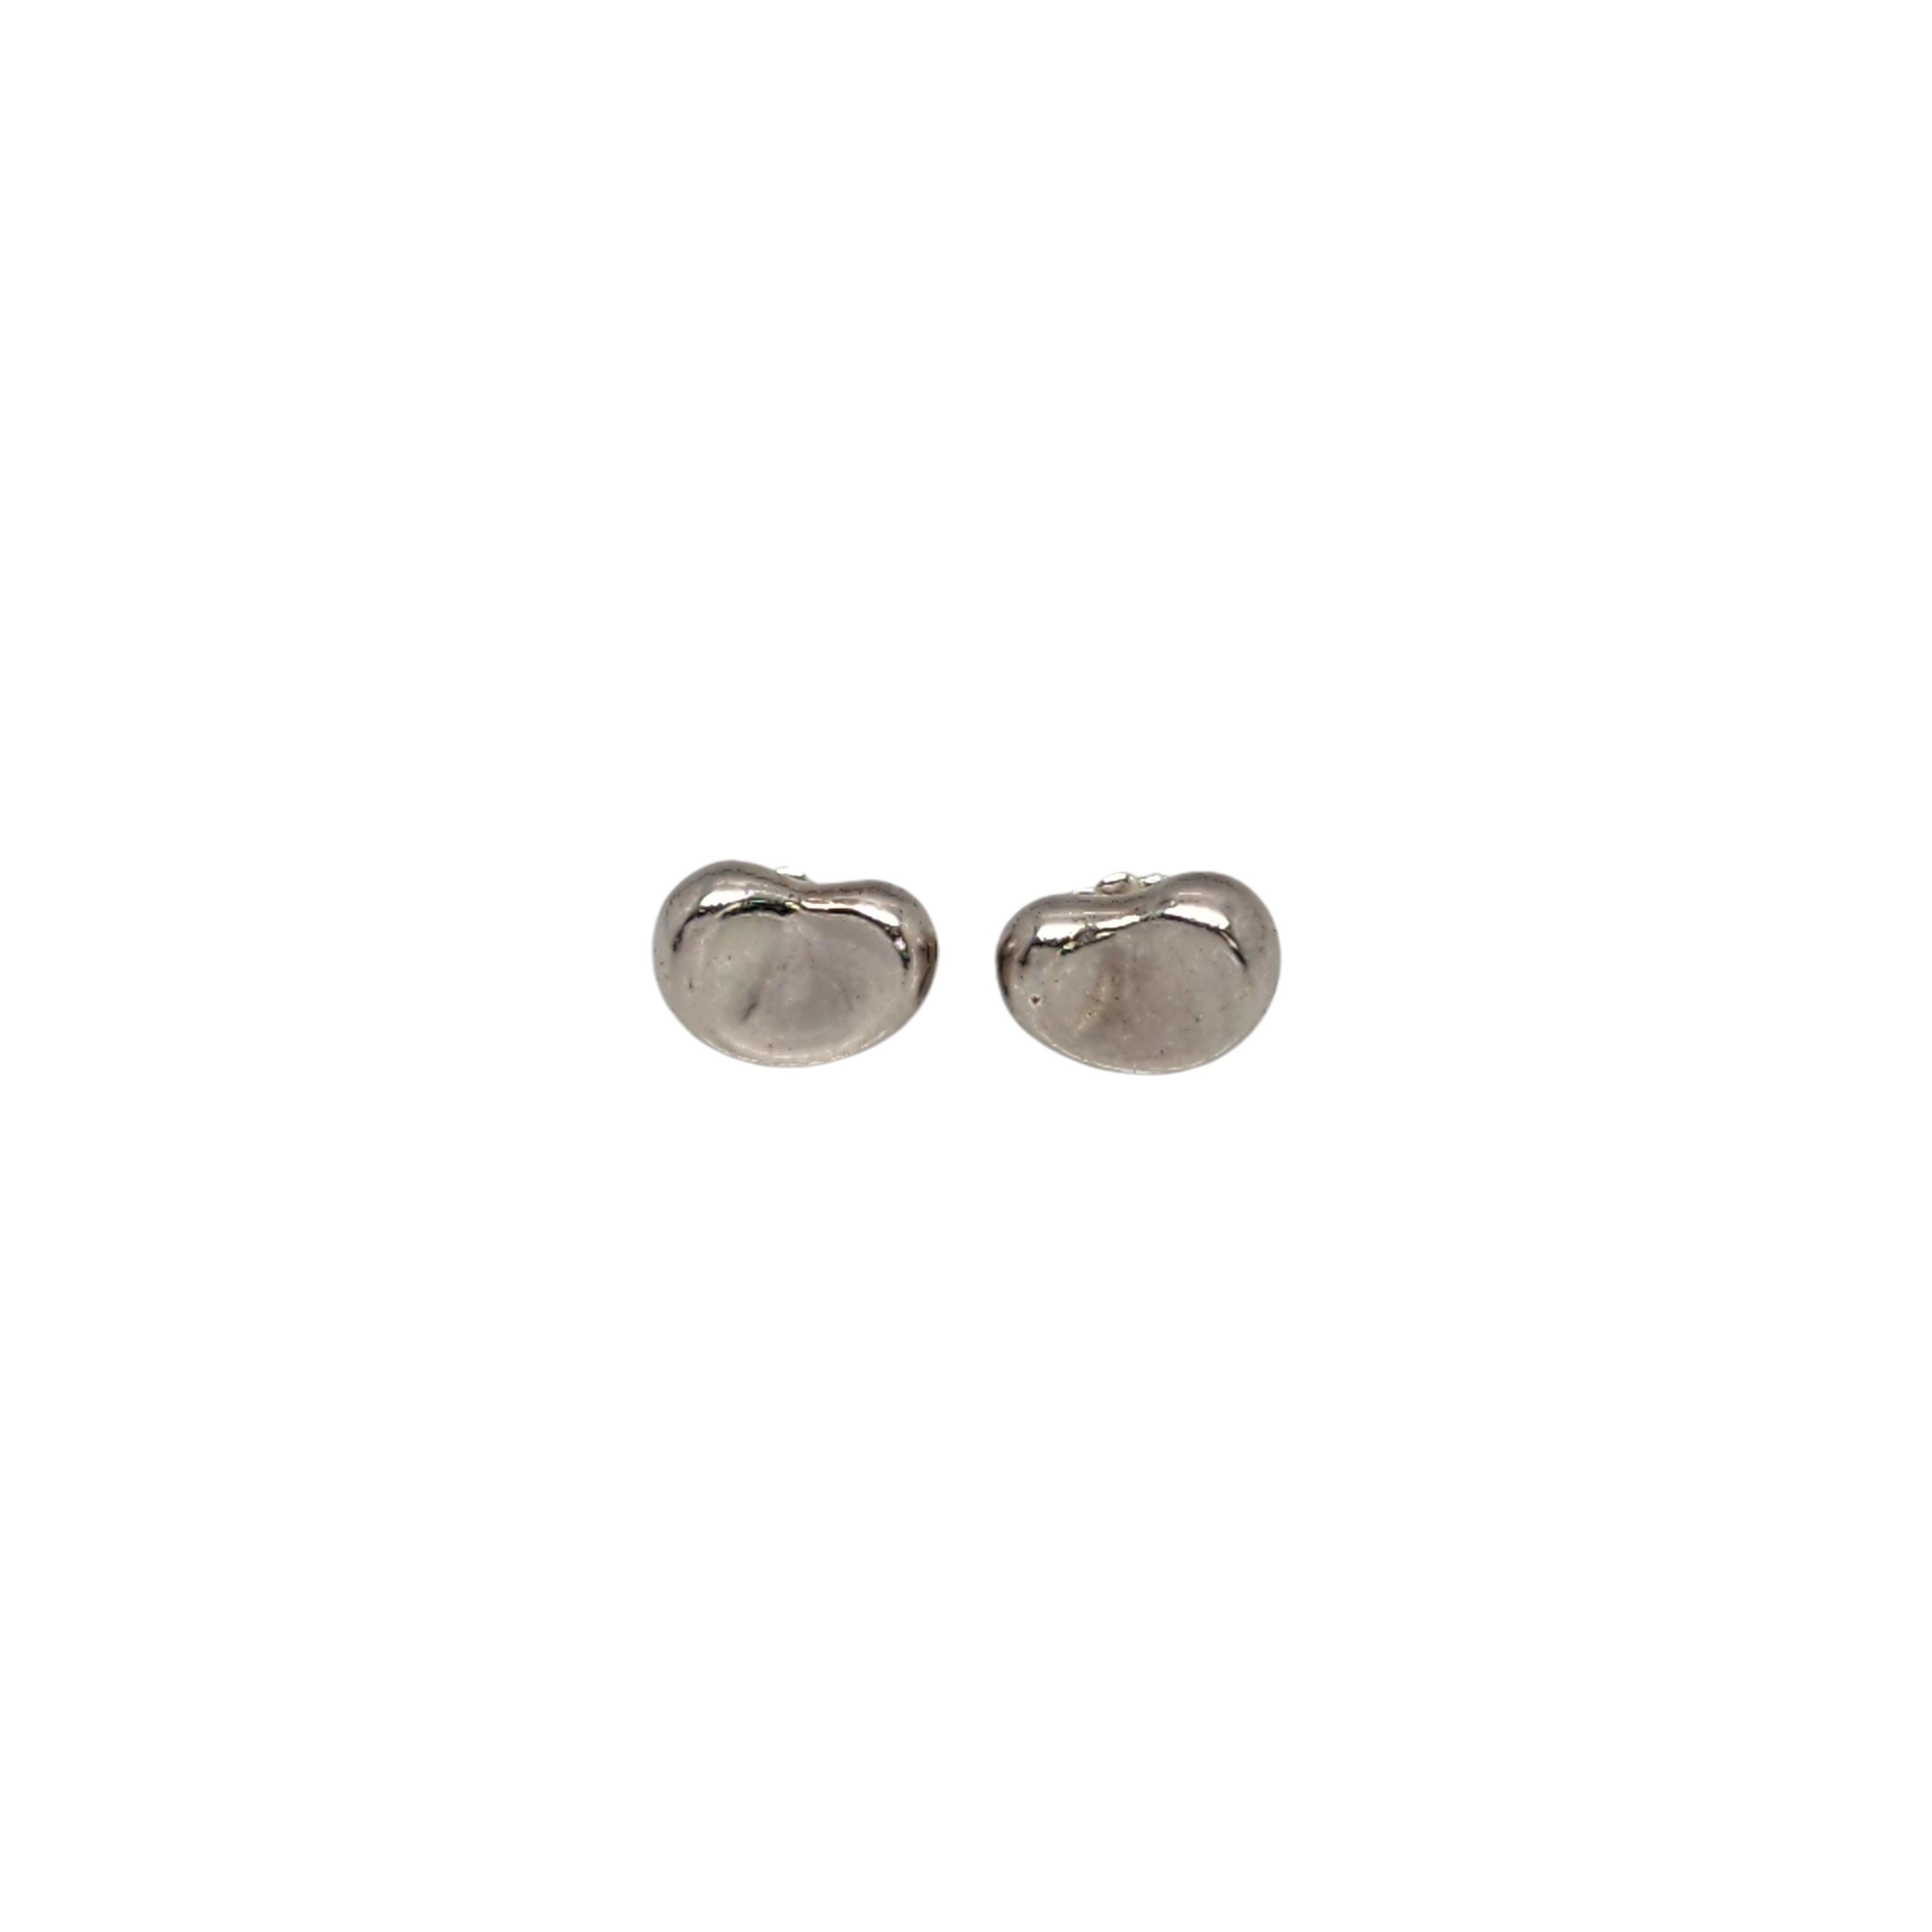 Tiffany & Co sterling silver small bean stud earrings by Elsa Peretti

Authentic Tiffany earrings featuring Elsa Peretti's iconic bean design. The sterling silver earring backs are NOT Tiffany & Co. Tiffany pouch and box are not included.

Measures